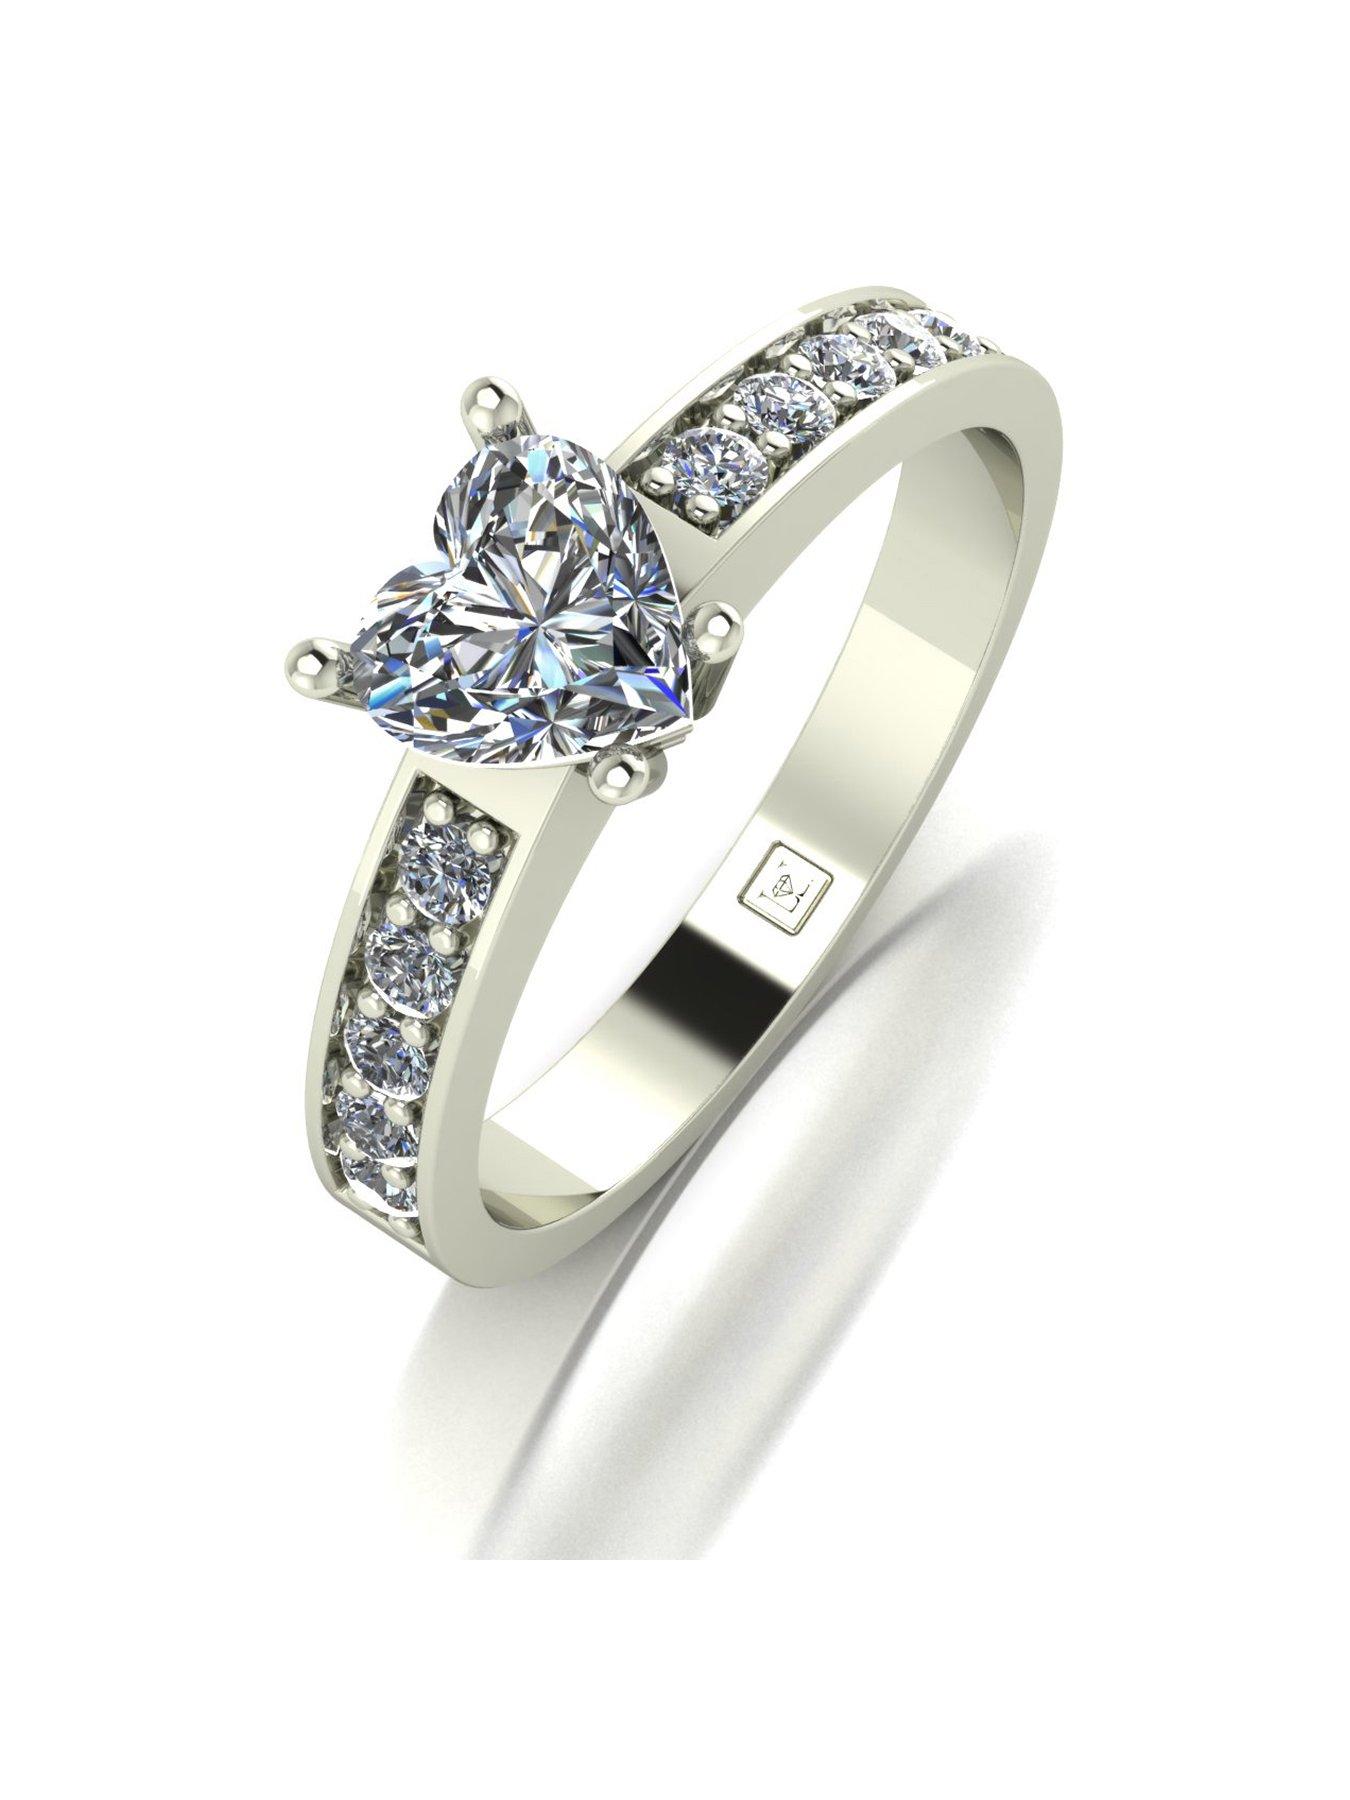  LADY LYNSEY MOISSANITE 9CT WHITE GOLD 1.30ct TOTAL HEART SOLITAIRE RING